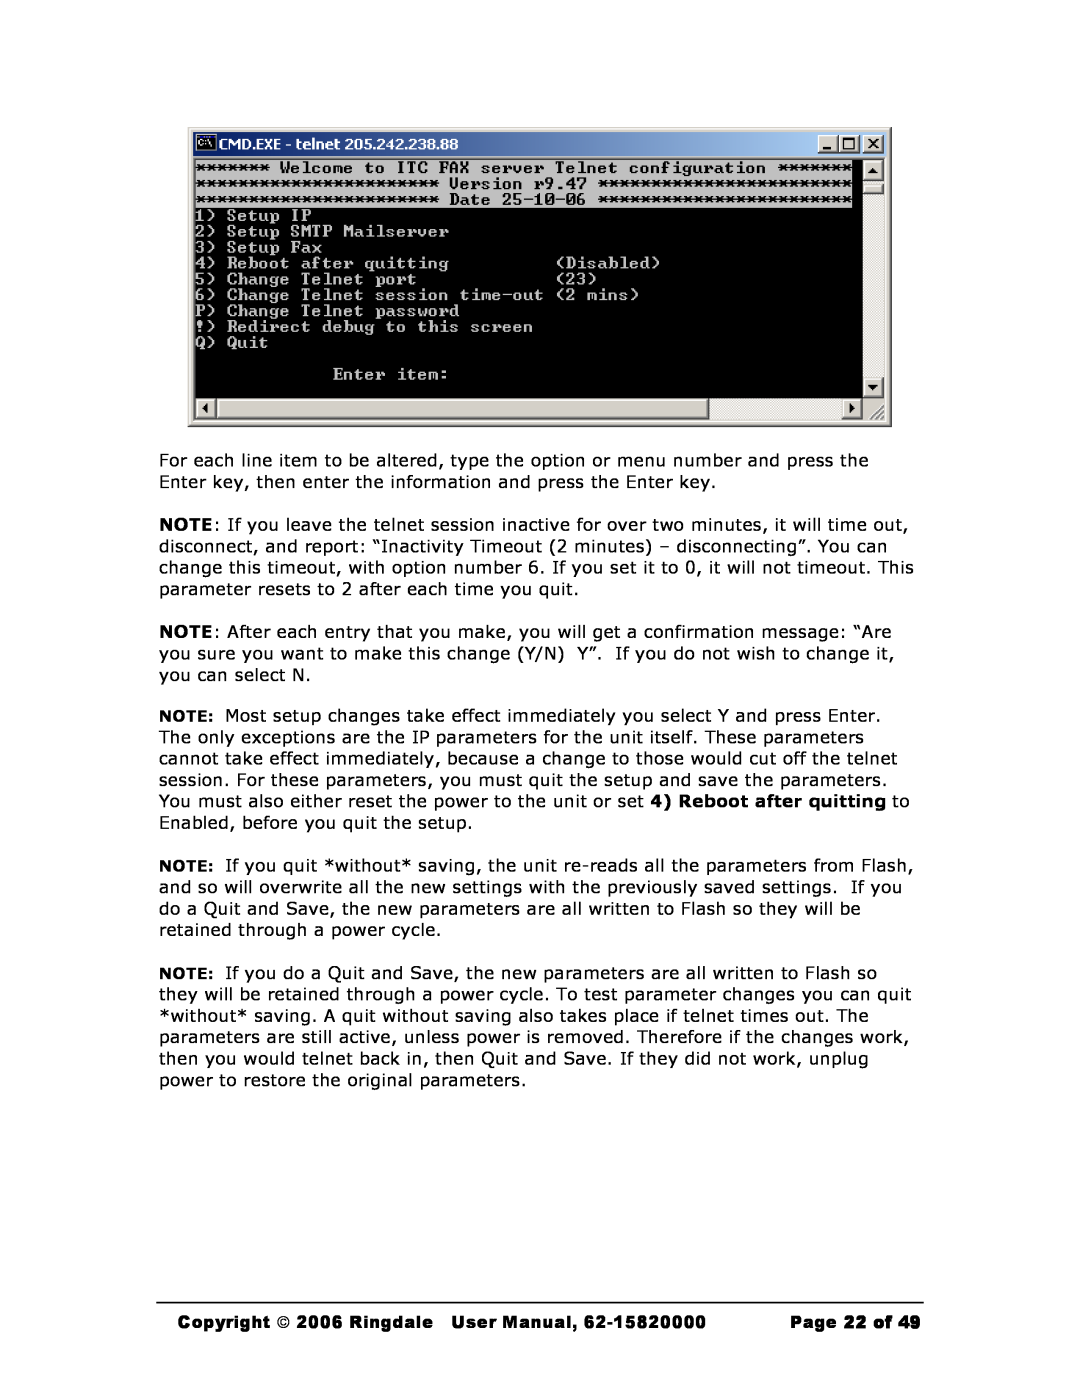 Black Box MC200A, Black Box Network Services FaxReceiver user manual Copyright  2006 Ringdale User Manual, Page 22 of 